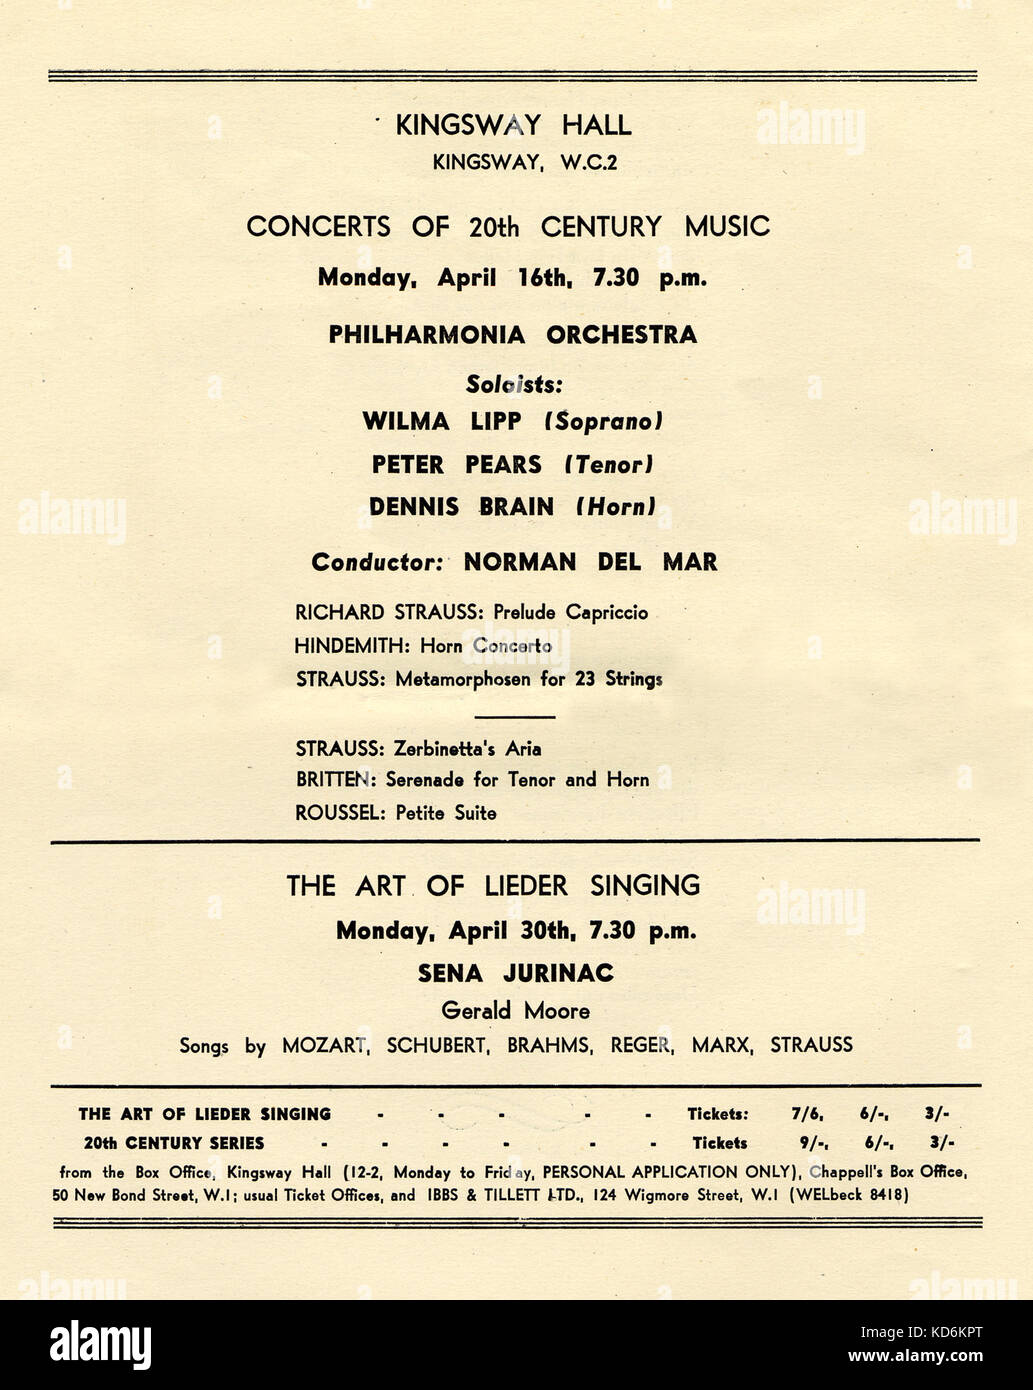 Advertisement page for concerts at the Kingsway Hall (Concerts of 20th Century Music) with the Philharmonia Orchestra, conducted by Norman Del Mar. Among pieces played, Richard  Strauss 's Prelude Capriccio and Metamorphosen for 23 Strings. Also The Art of Lieder Singing with soprano Sena Jurinac. Stock Photo